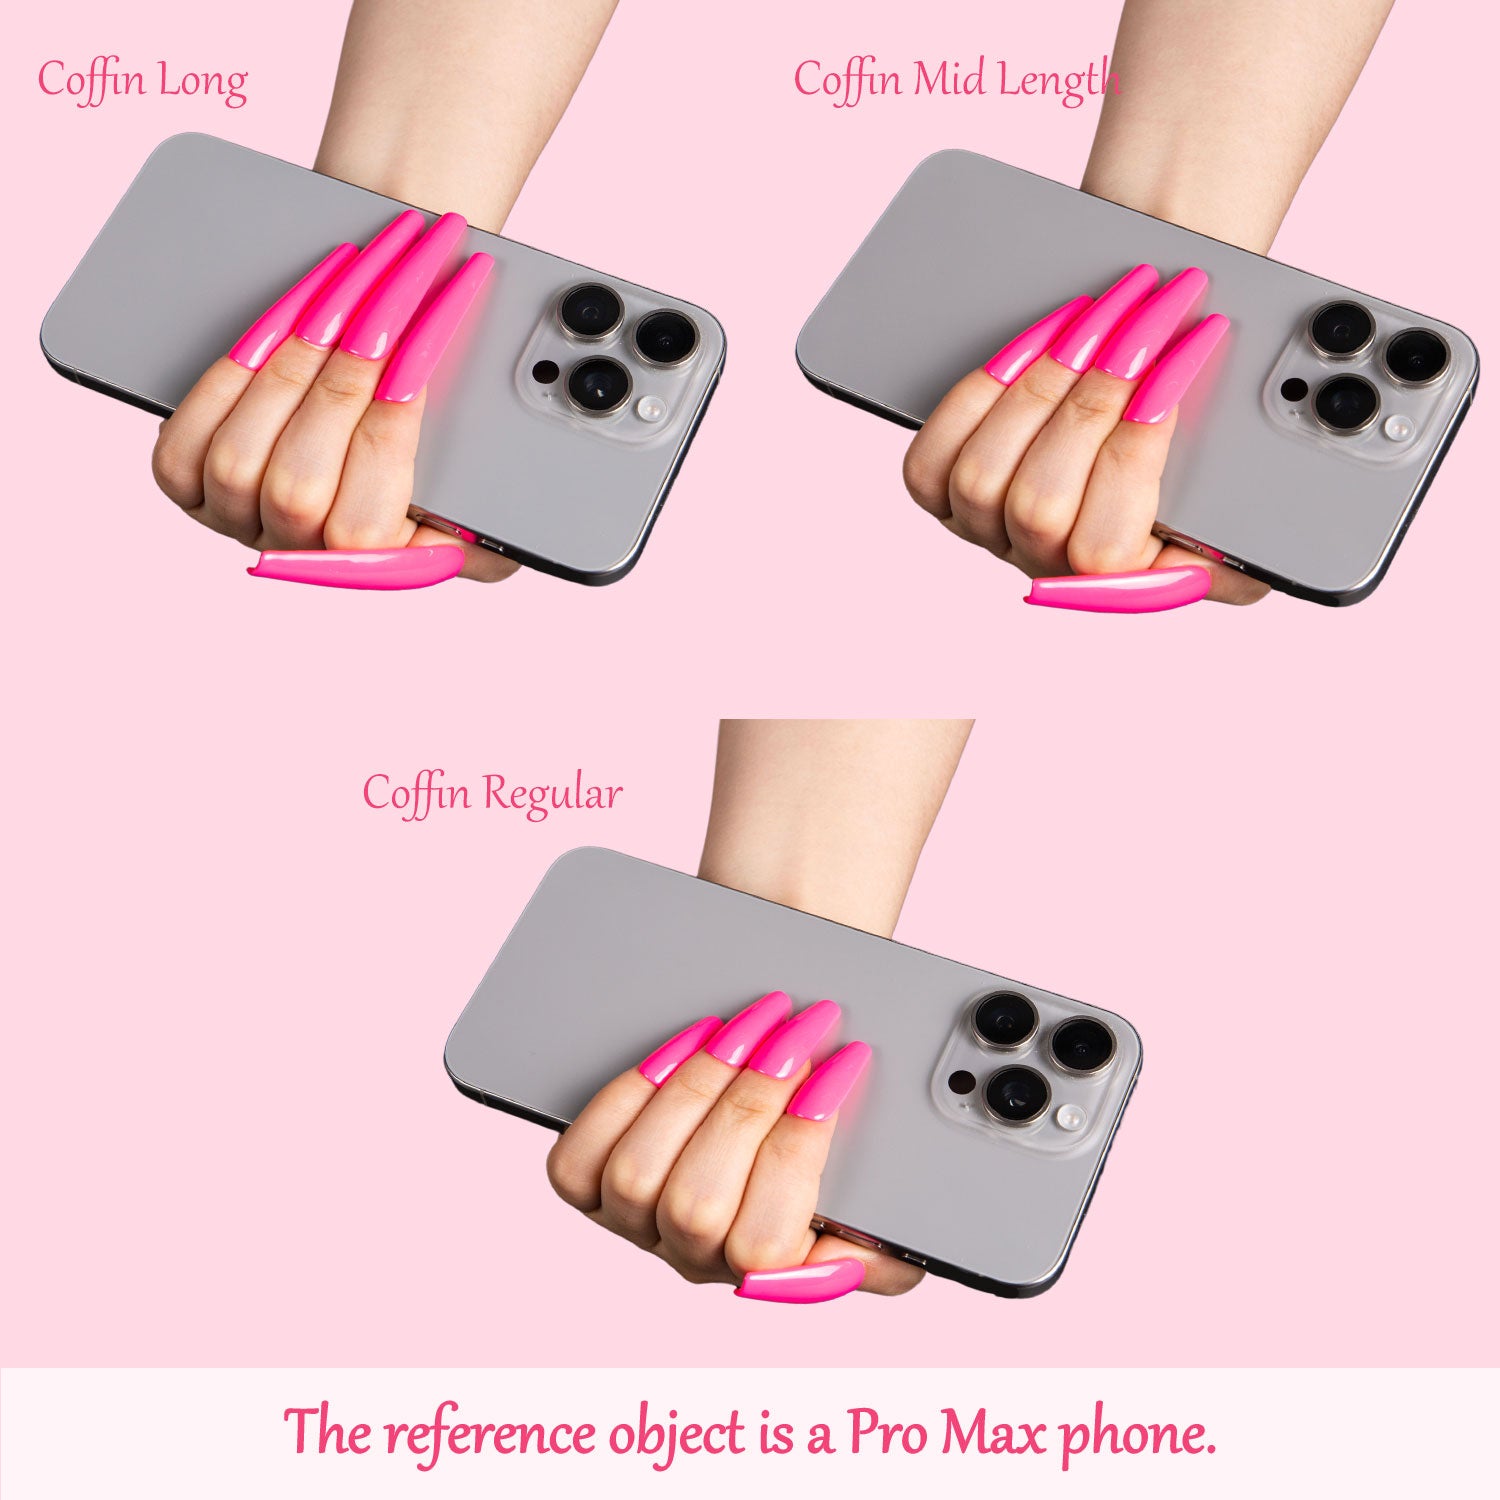 Three different lengths of pink coffin-shaped press-on nails shown on a hand holding a Pro Max phone. The lengths are labeled Coffin Long, Coffin Mid Length, and Coffin Regular.